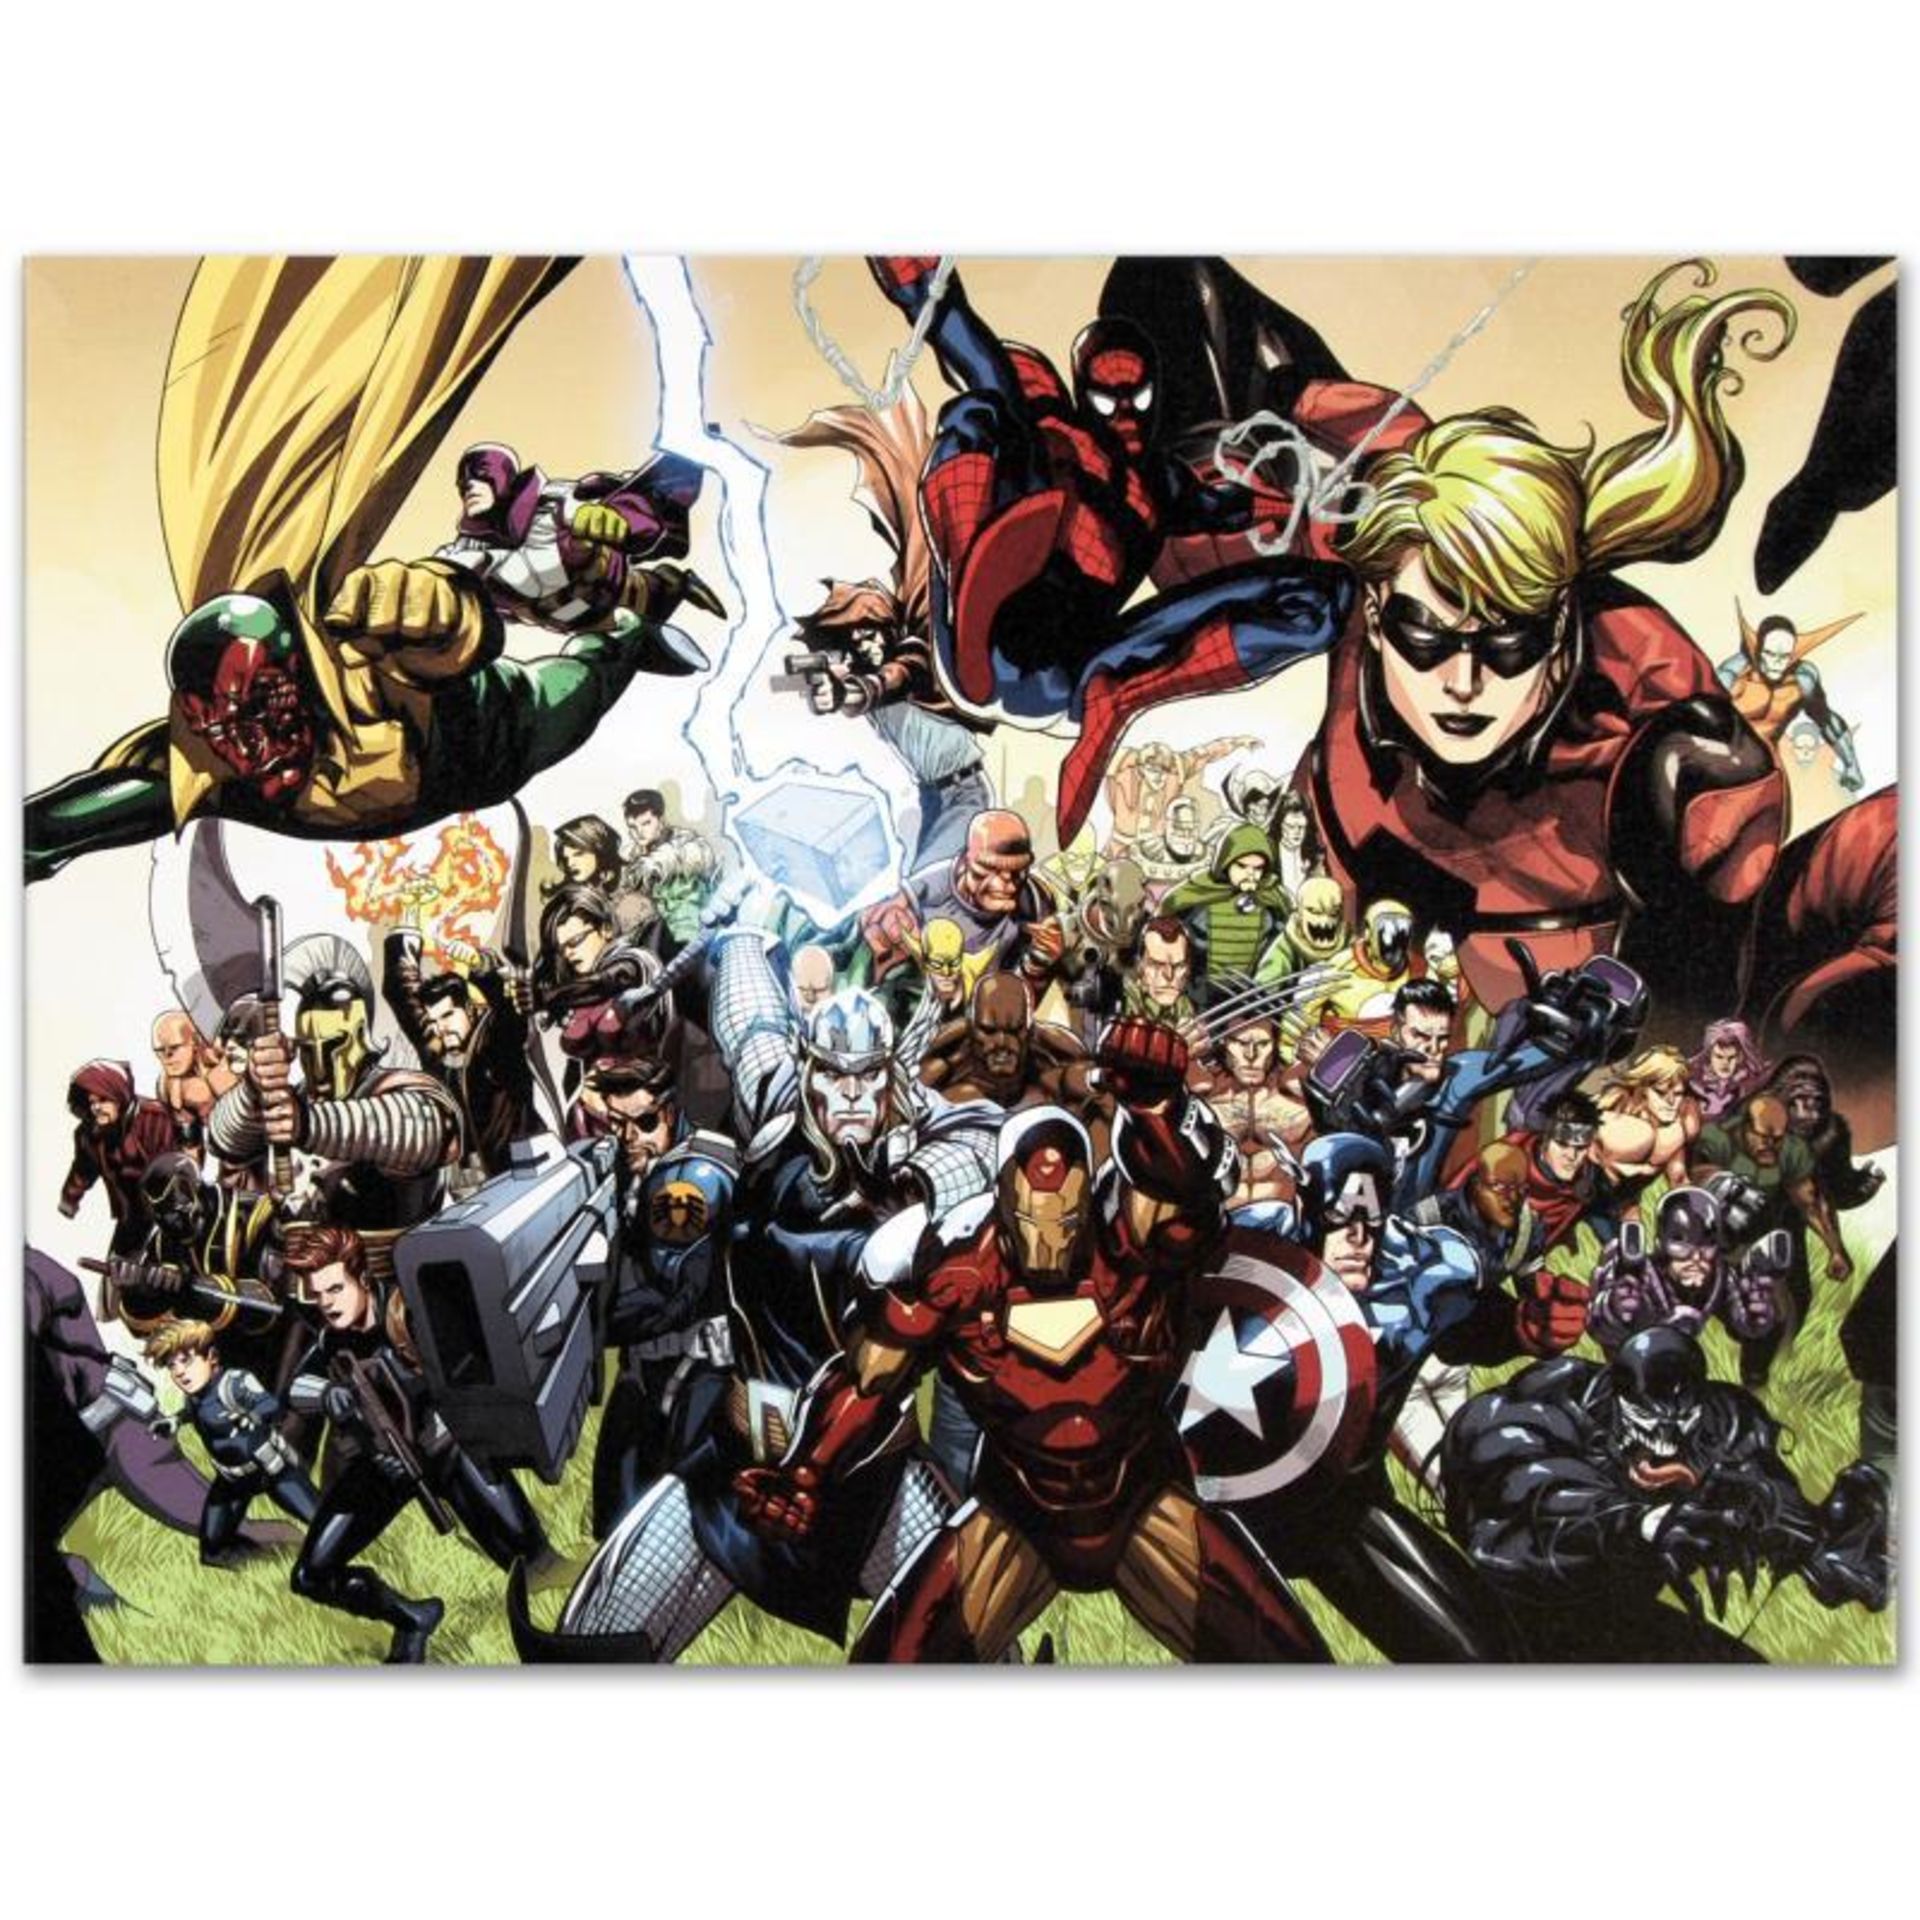 Marvel Comics "Secret Invasion #6" Numbered Limited Edition Giclee on Canvas by